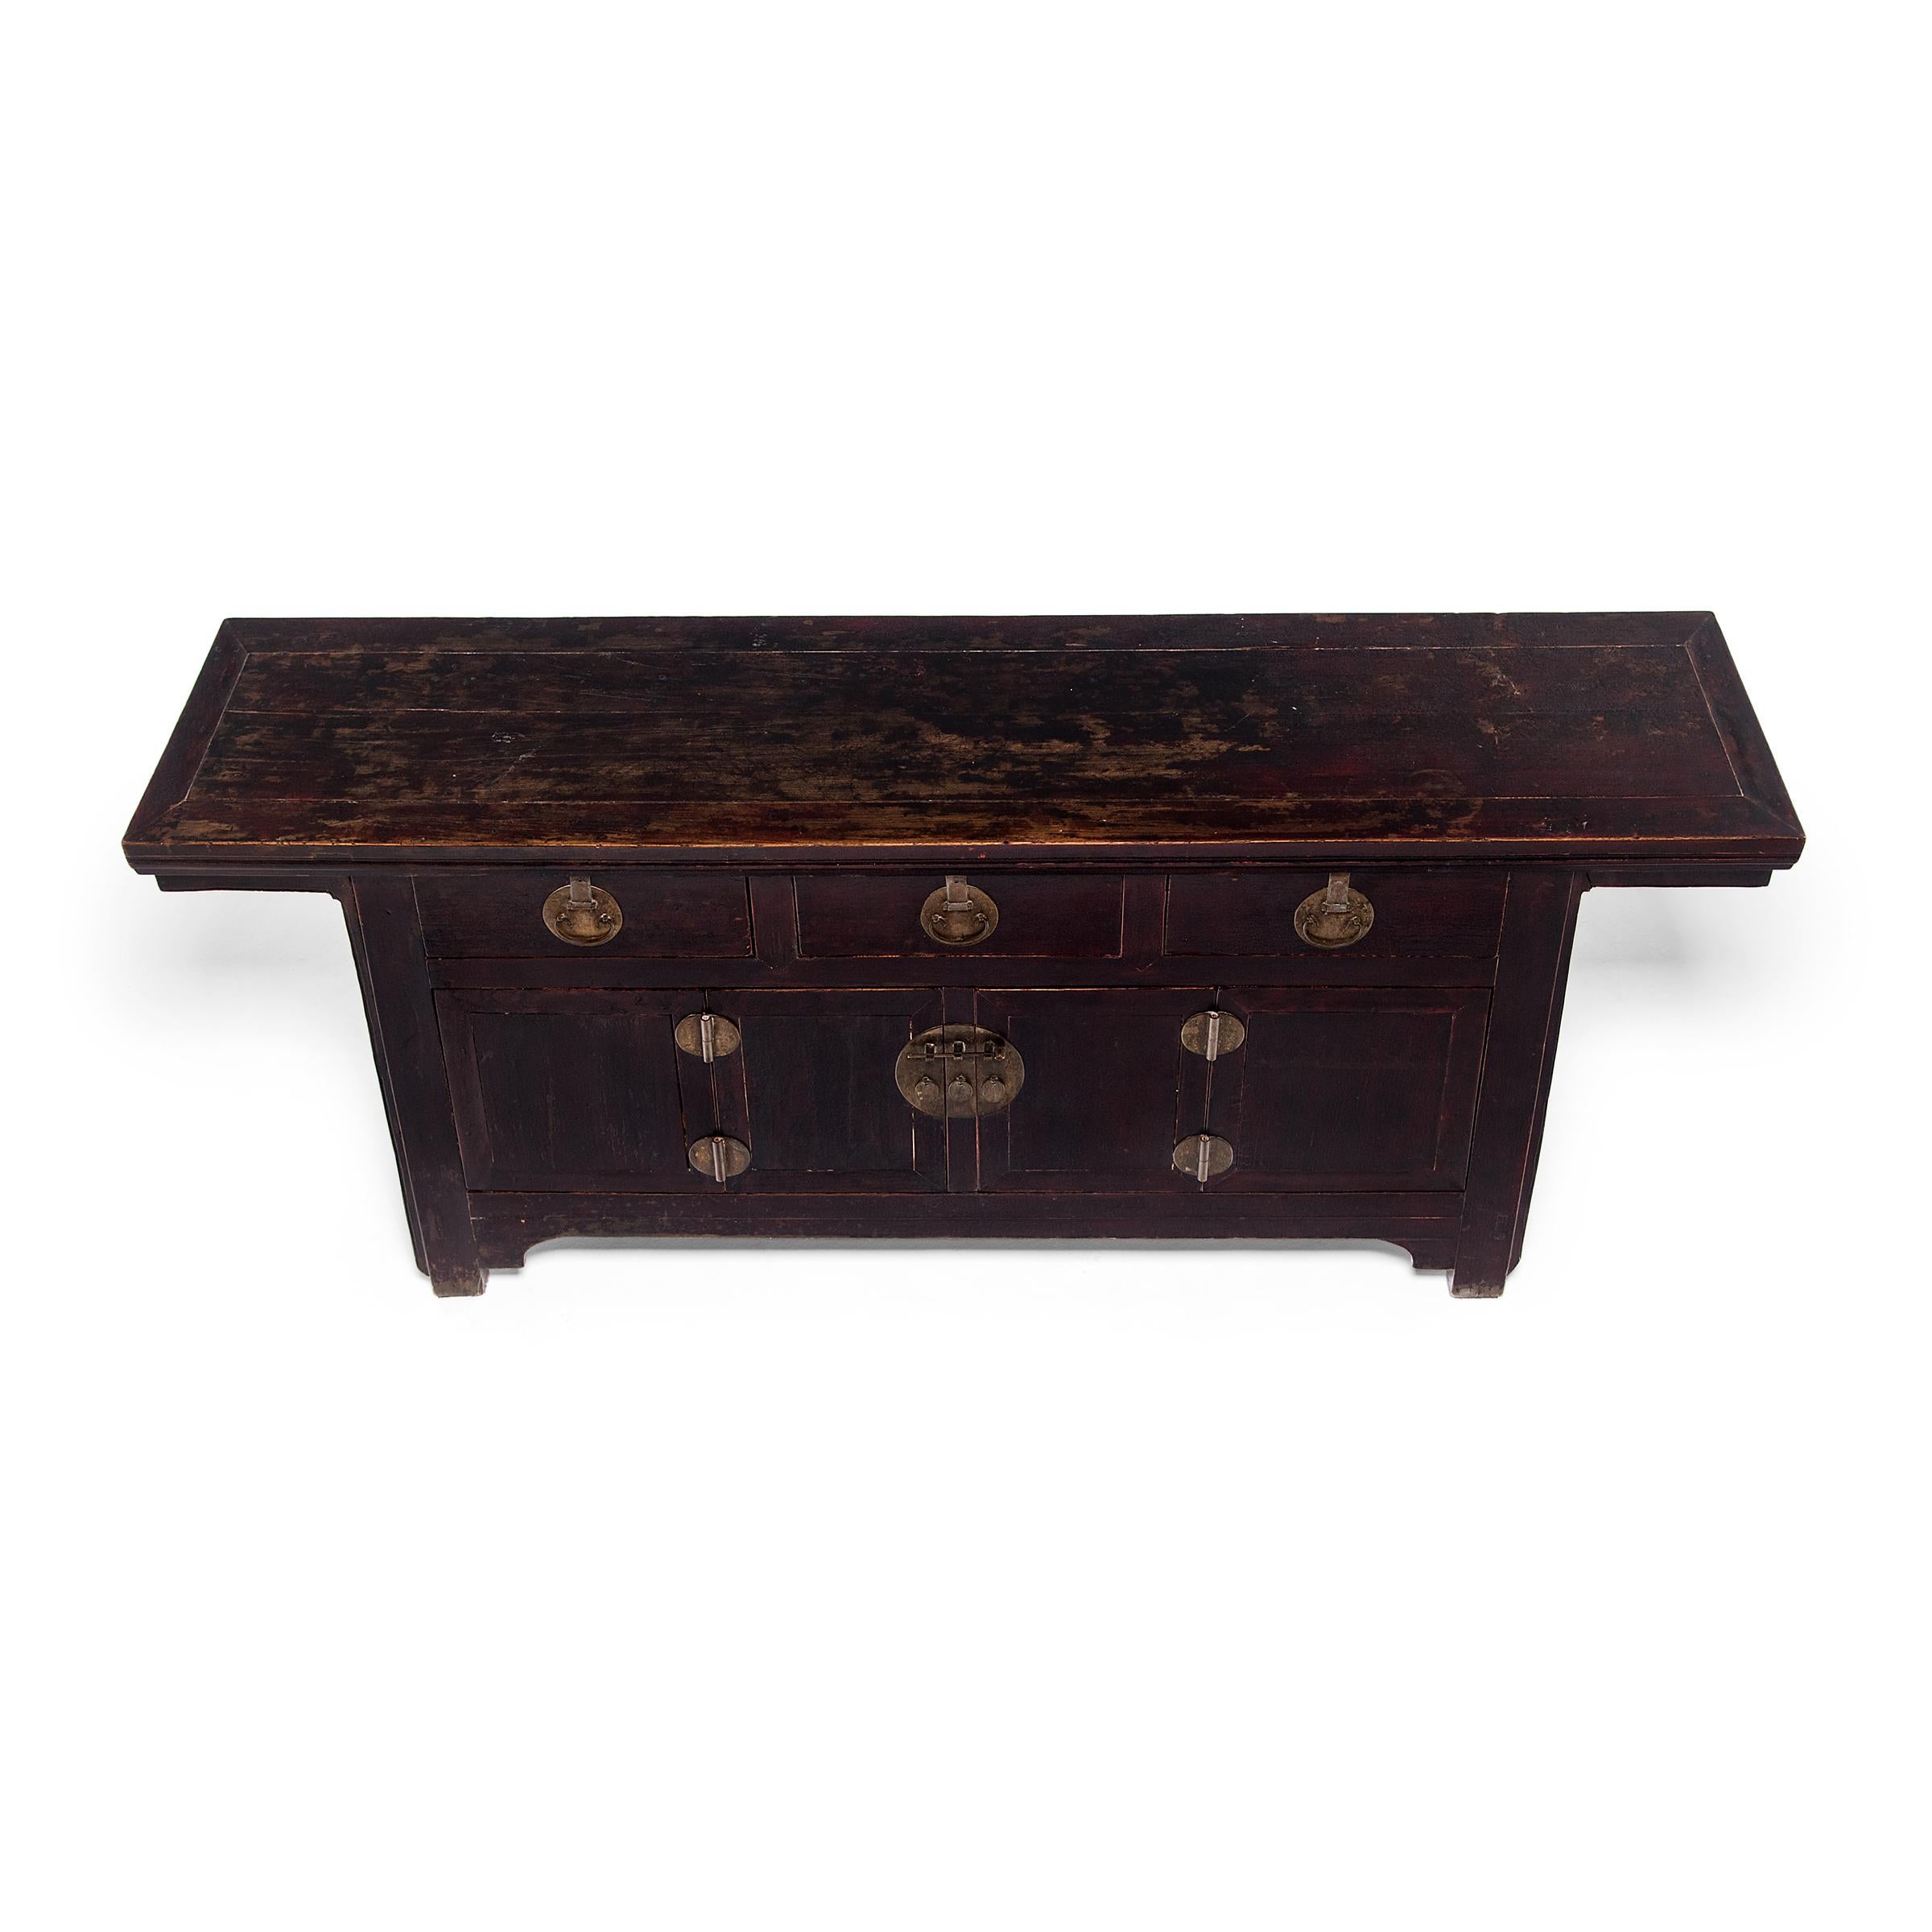 19th Century Chinese Crackled Lacquer Three-Drawer Coffer, circa 1850